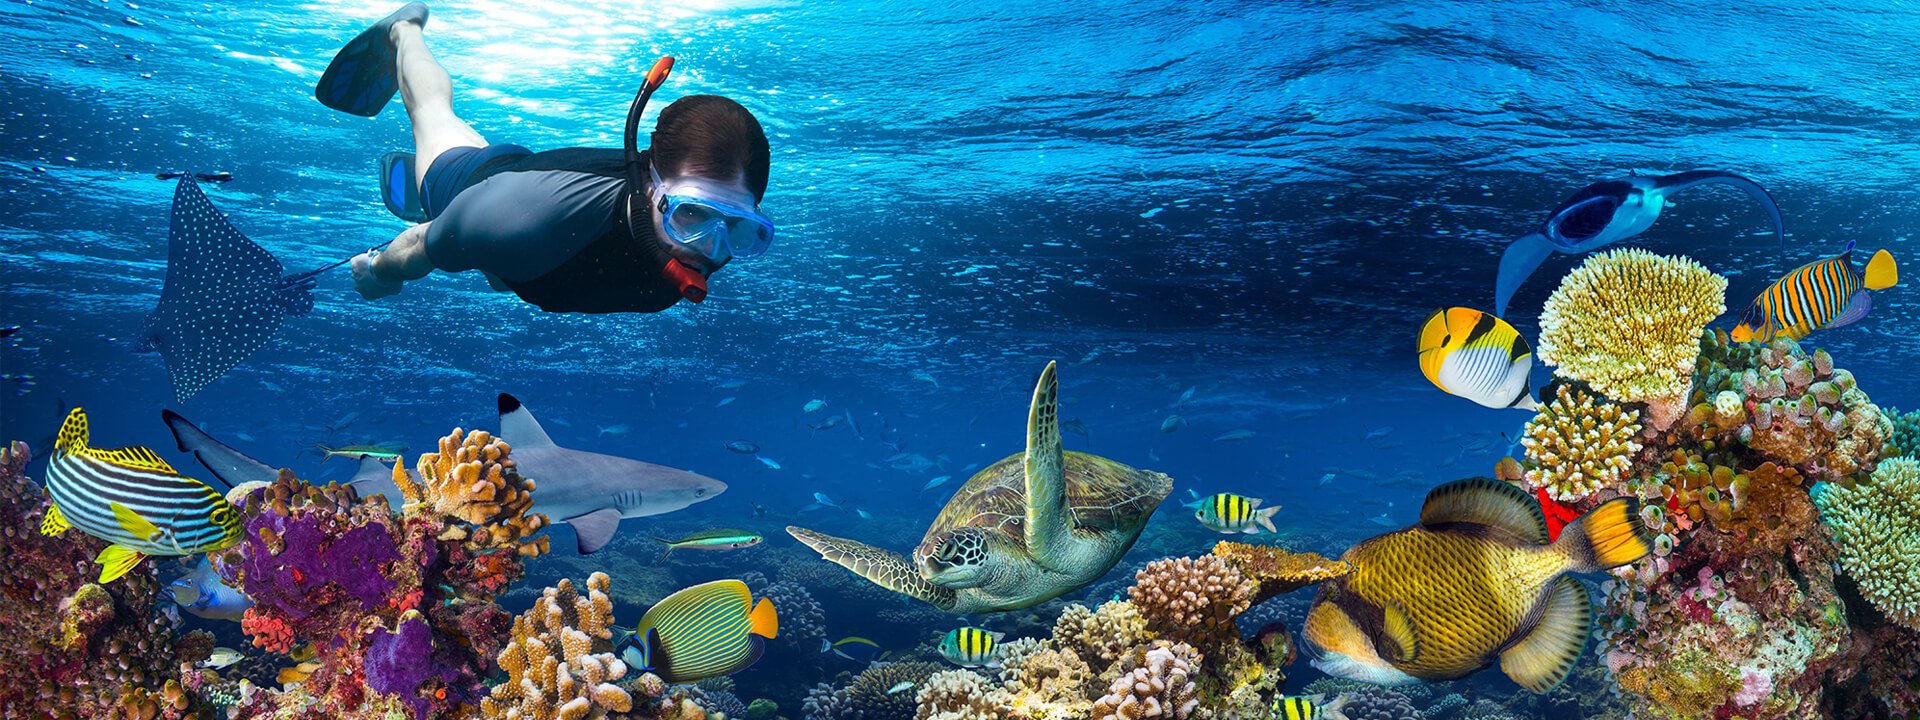 Private Tour Snorkeling in Cancun and Riviera Maya